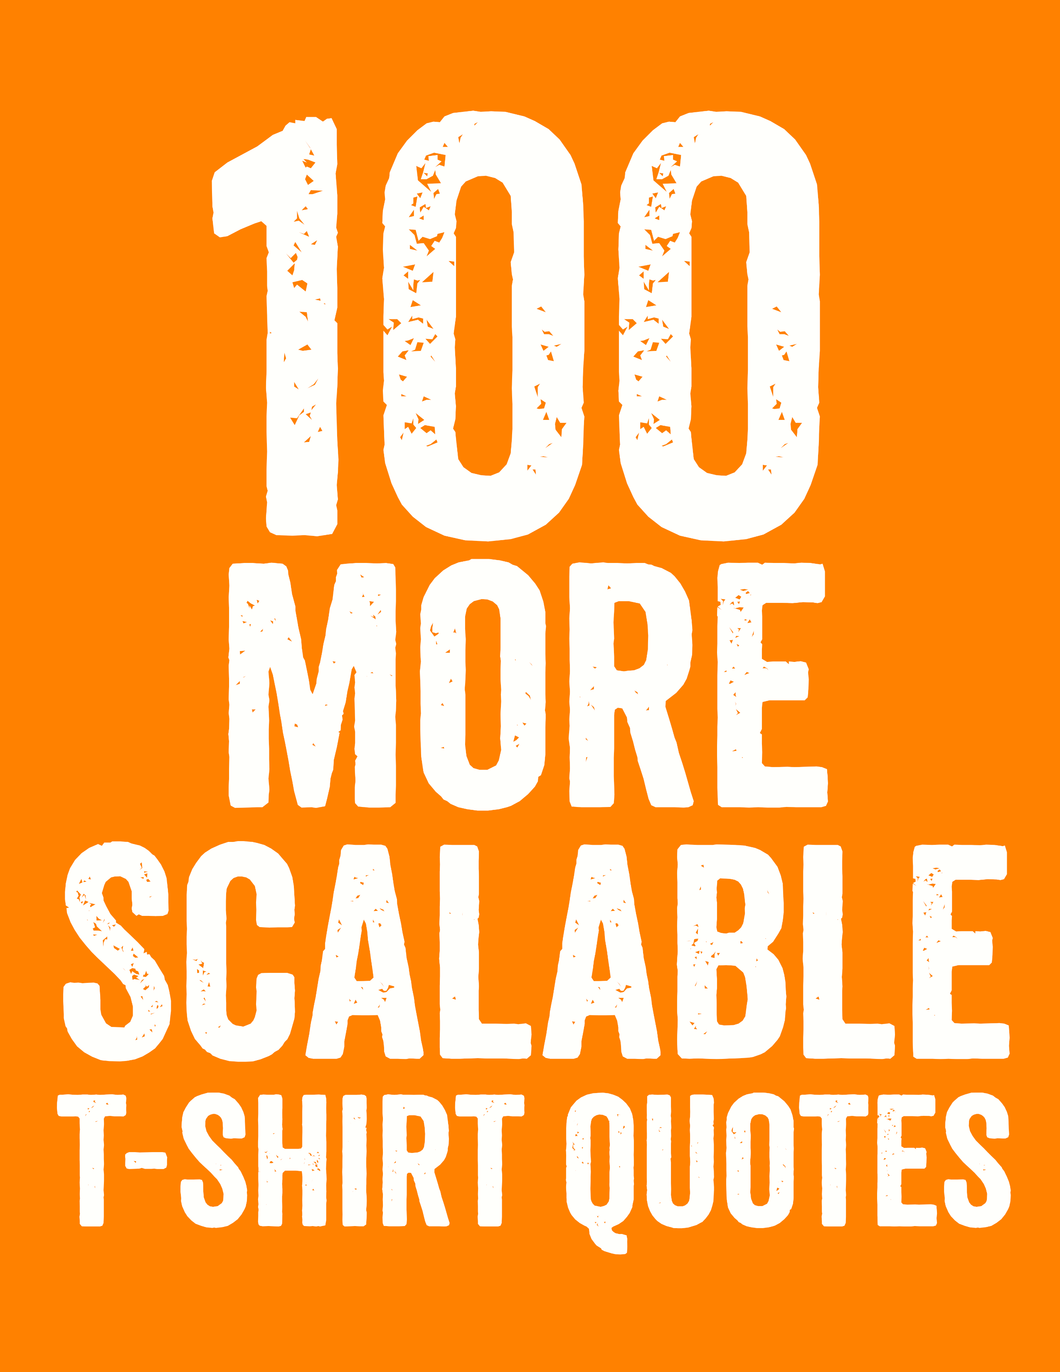 100 More Scalable T-Shirt Quotes